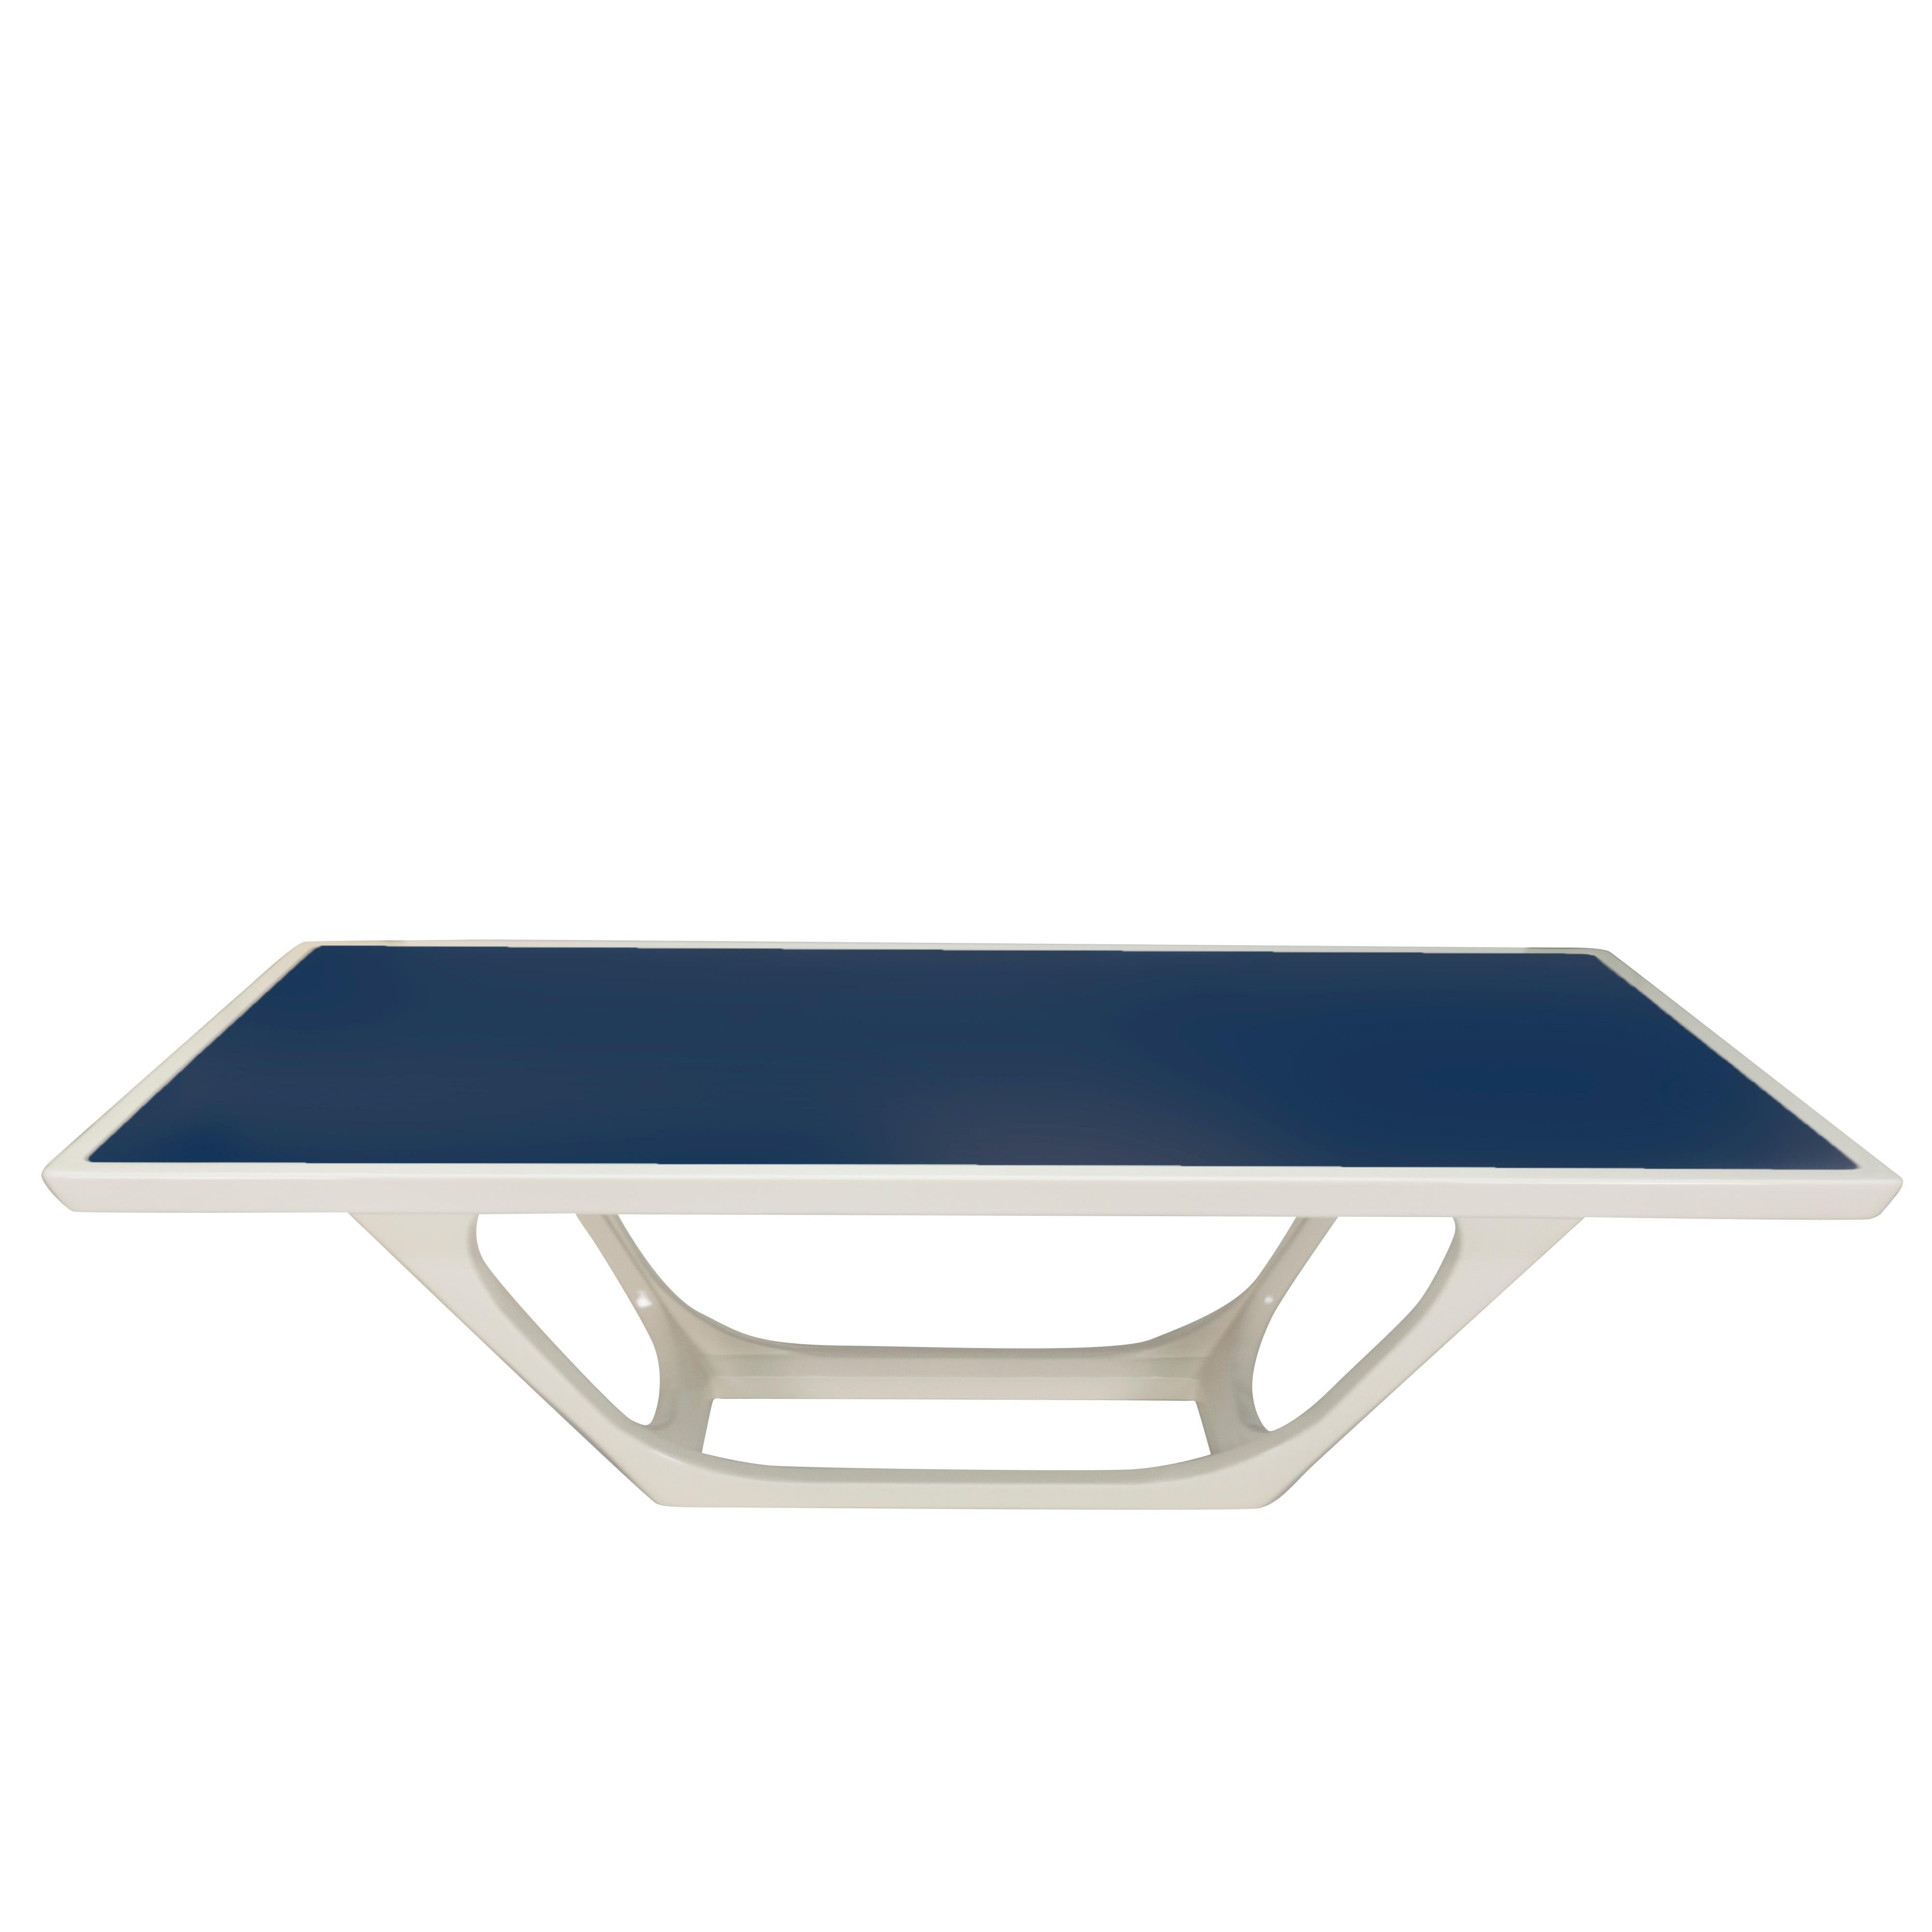 Maple Large Modern Dining Room Table with Glass Top For Sale